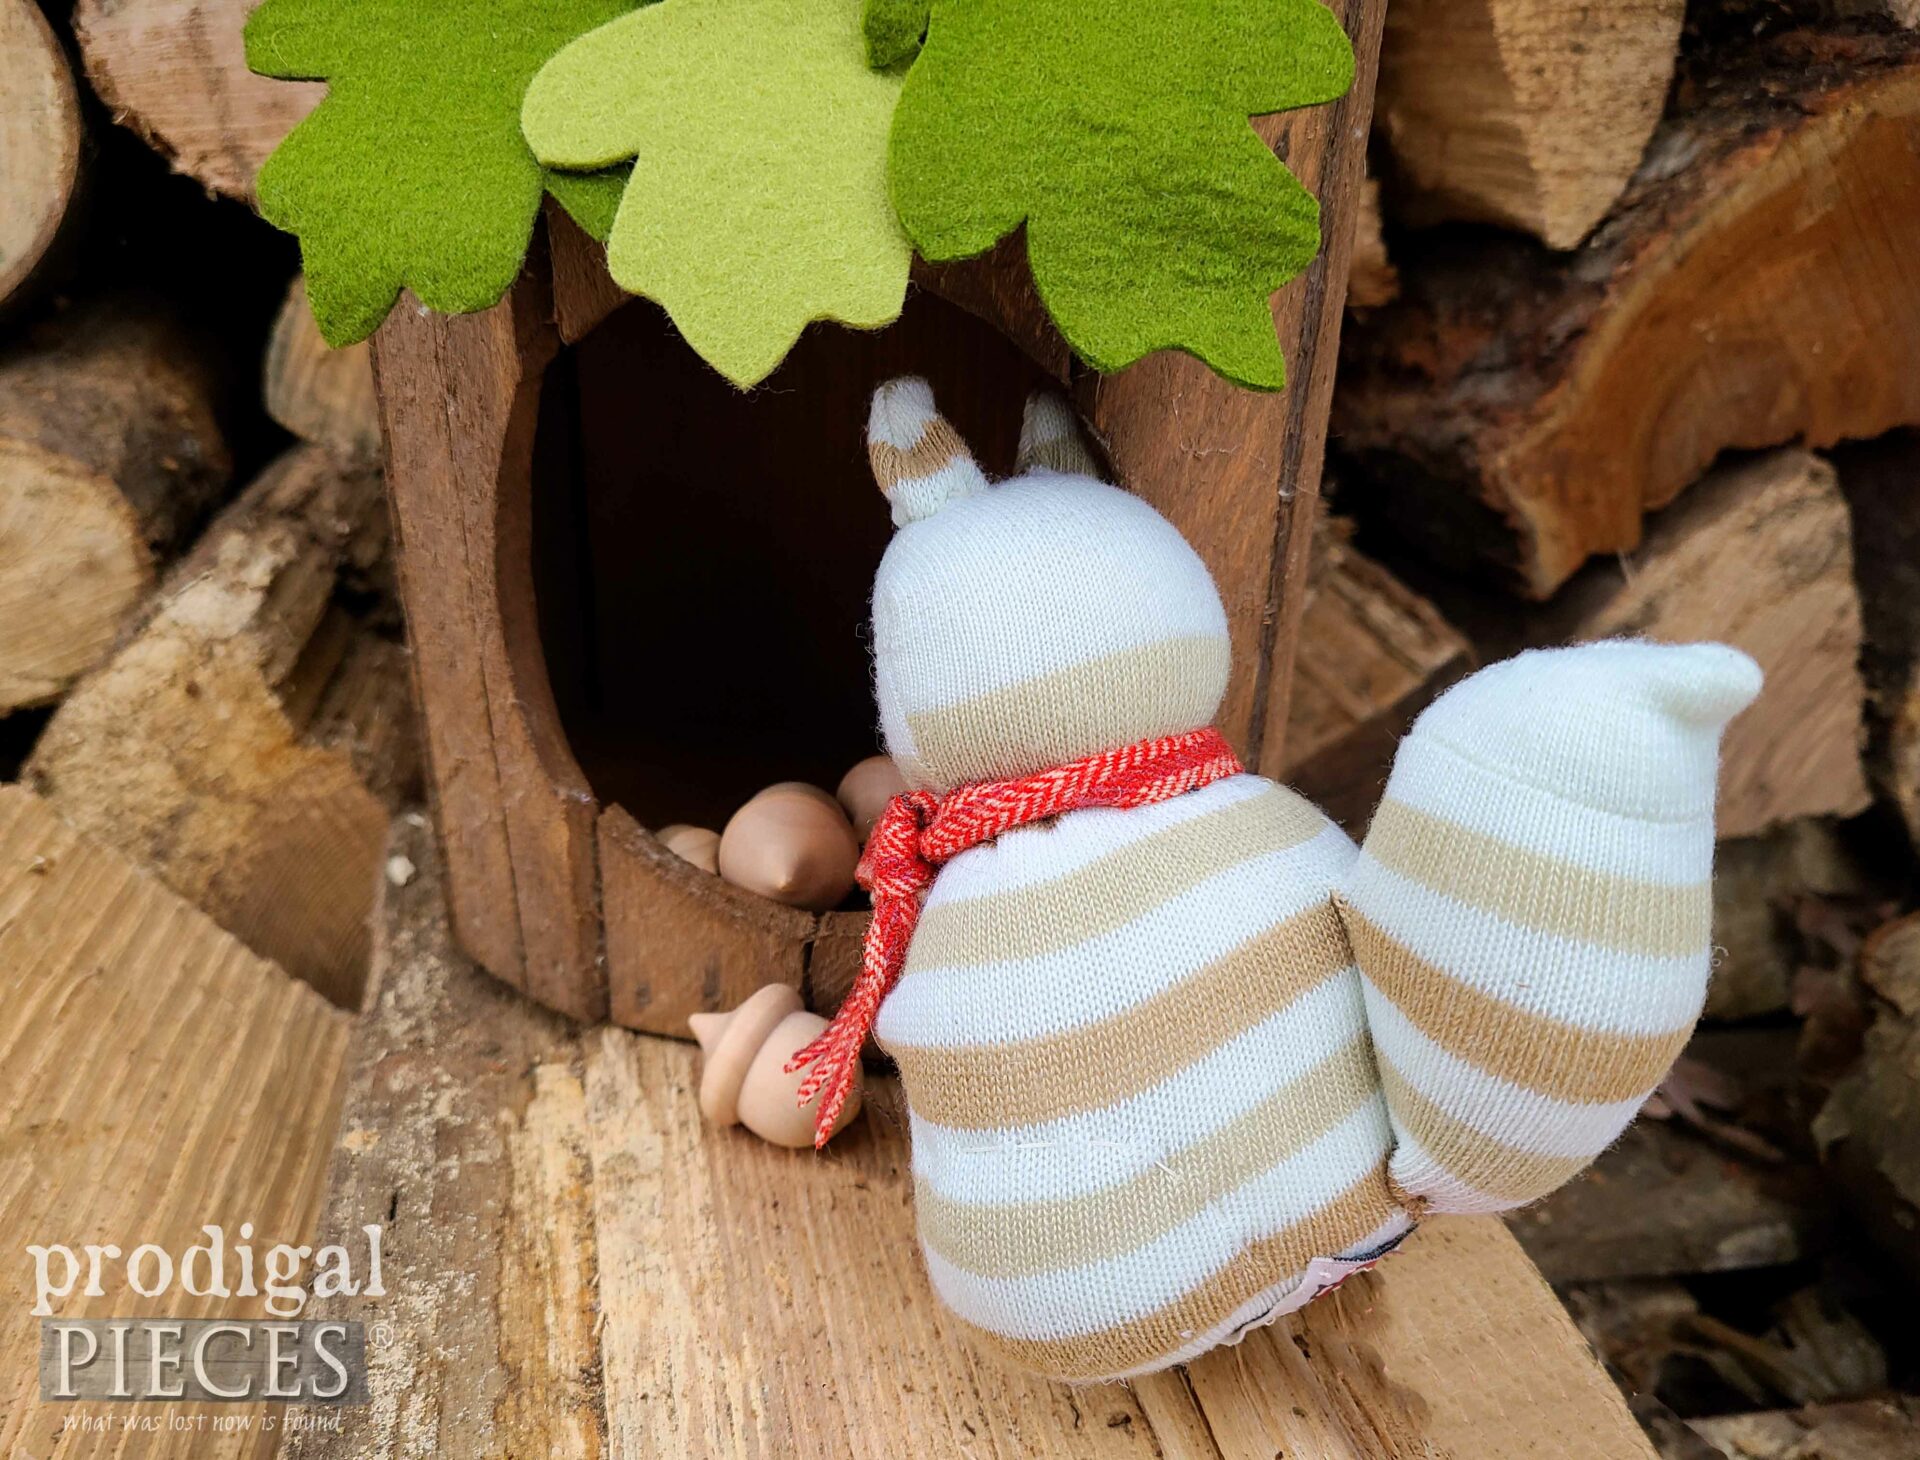 Super Cute Sock Squirrel Tucking Away Wooden Acorns in Playset by Larissa of Prodigal Pieces | prodigalpieces.com #prodigalpieces #repurposed #toys #playset #handmade